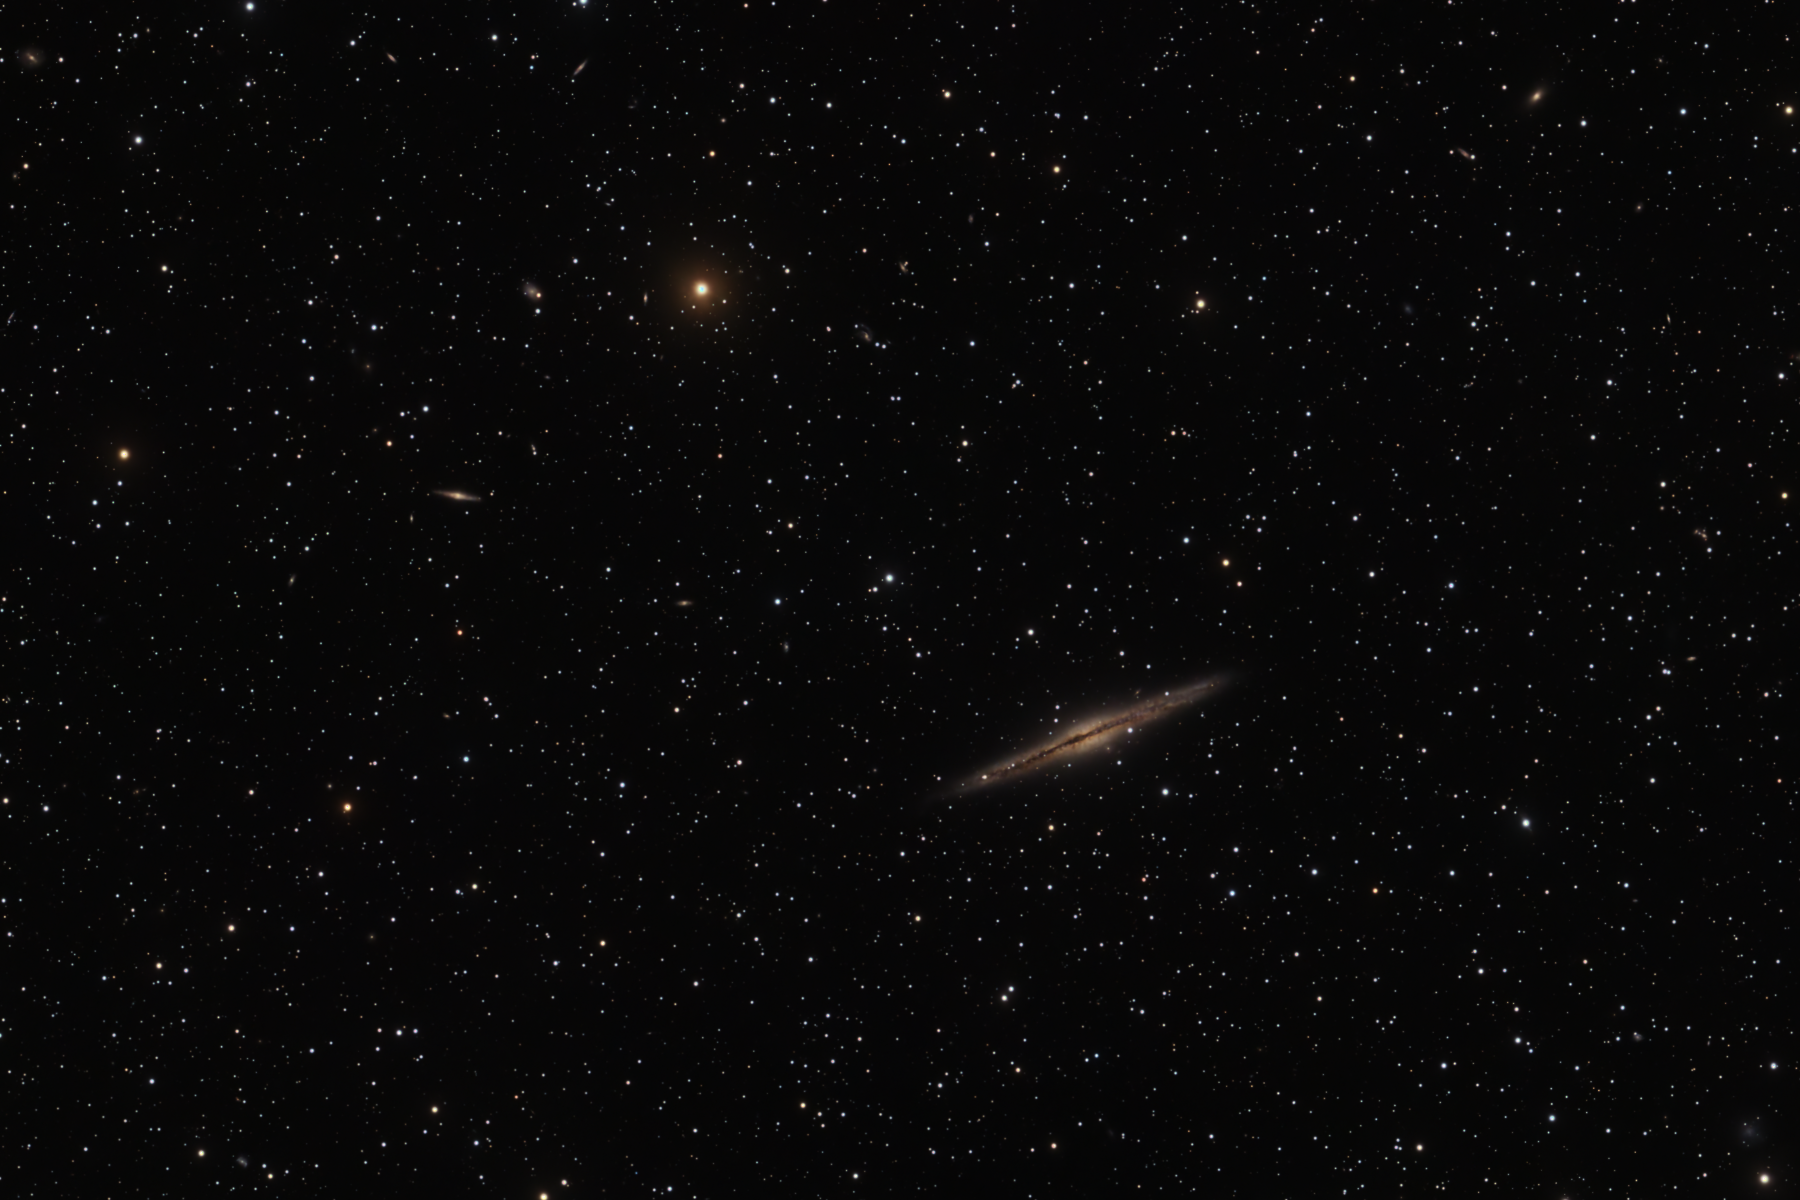 NGC 891, The Outer Limits Galaxy